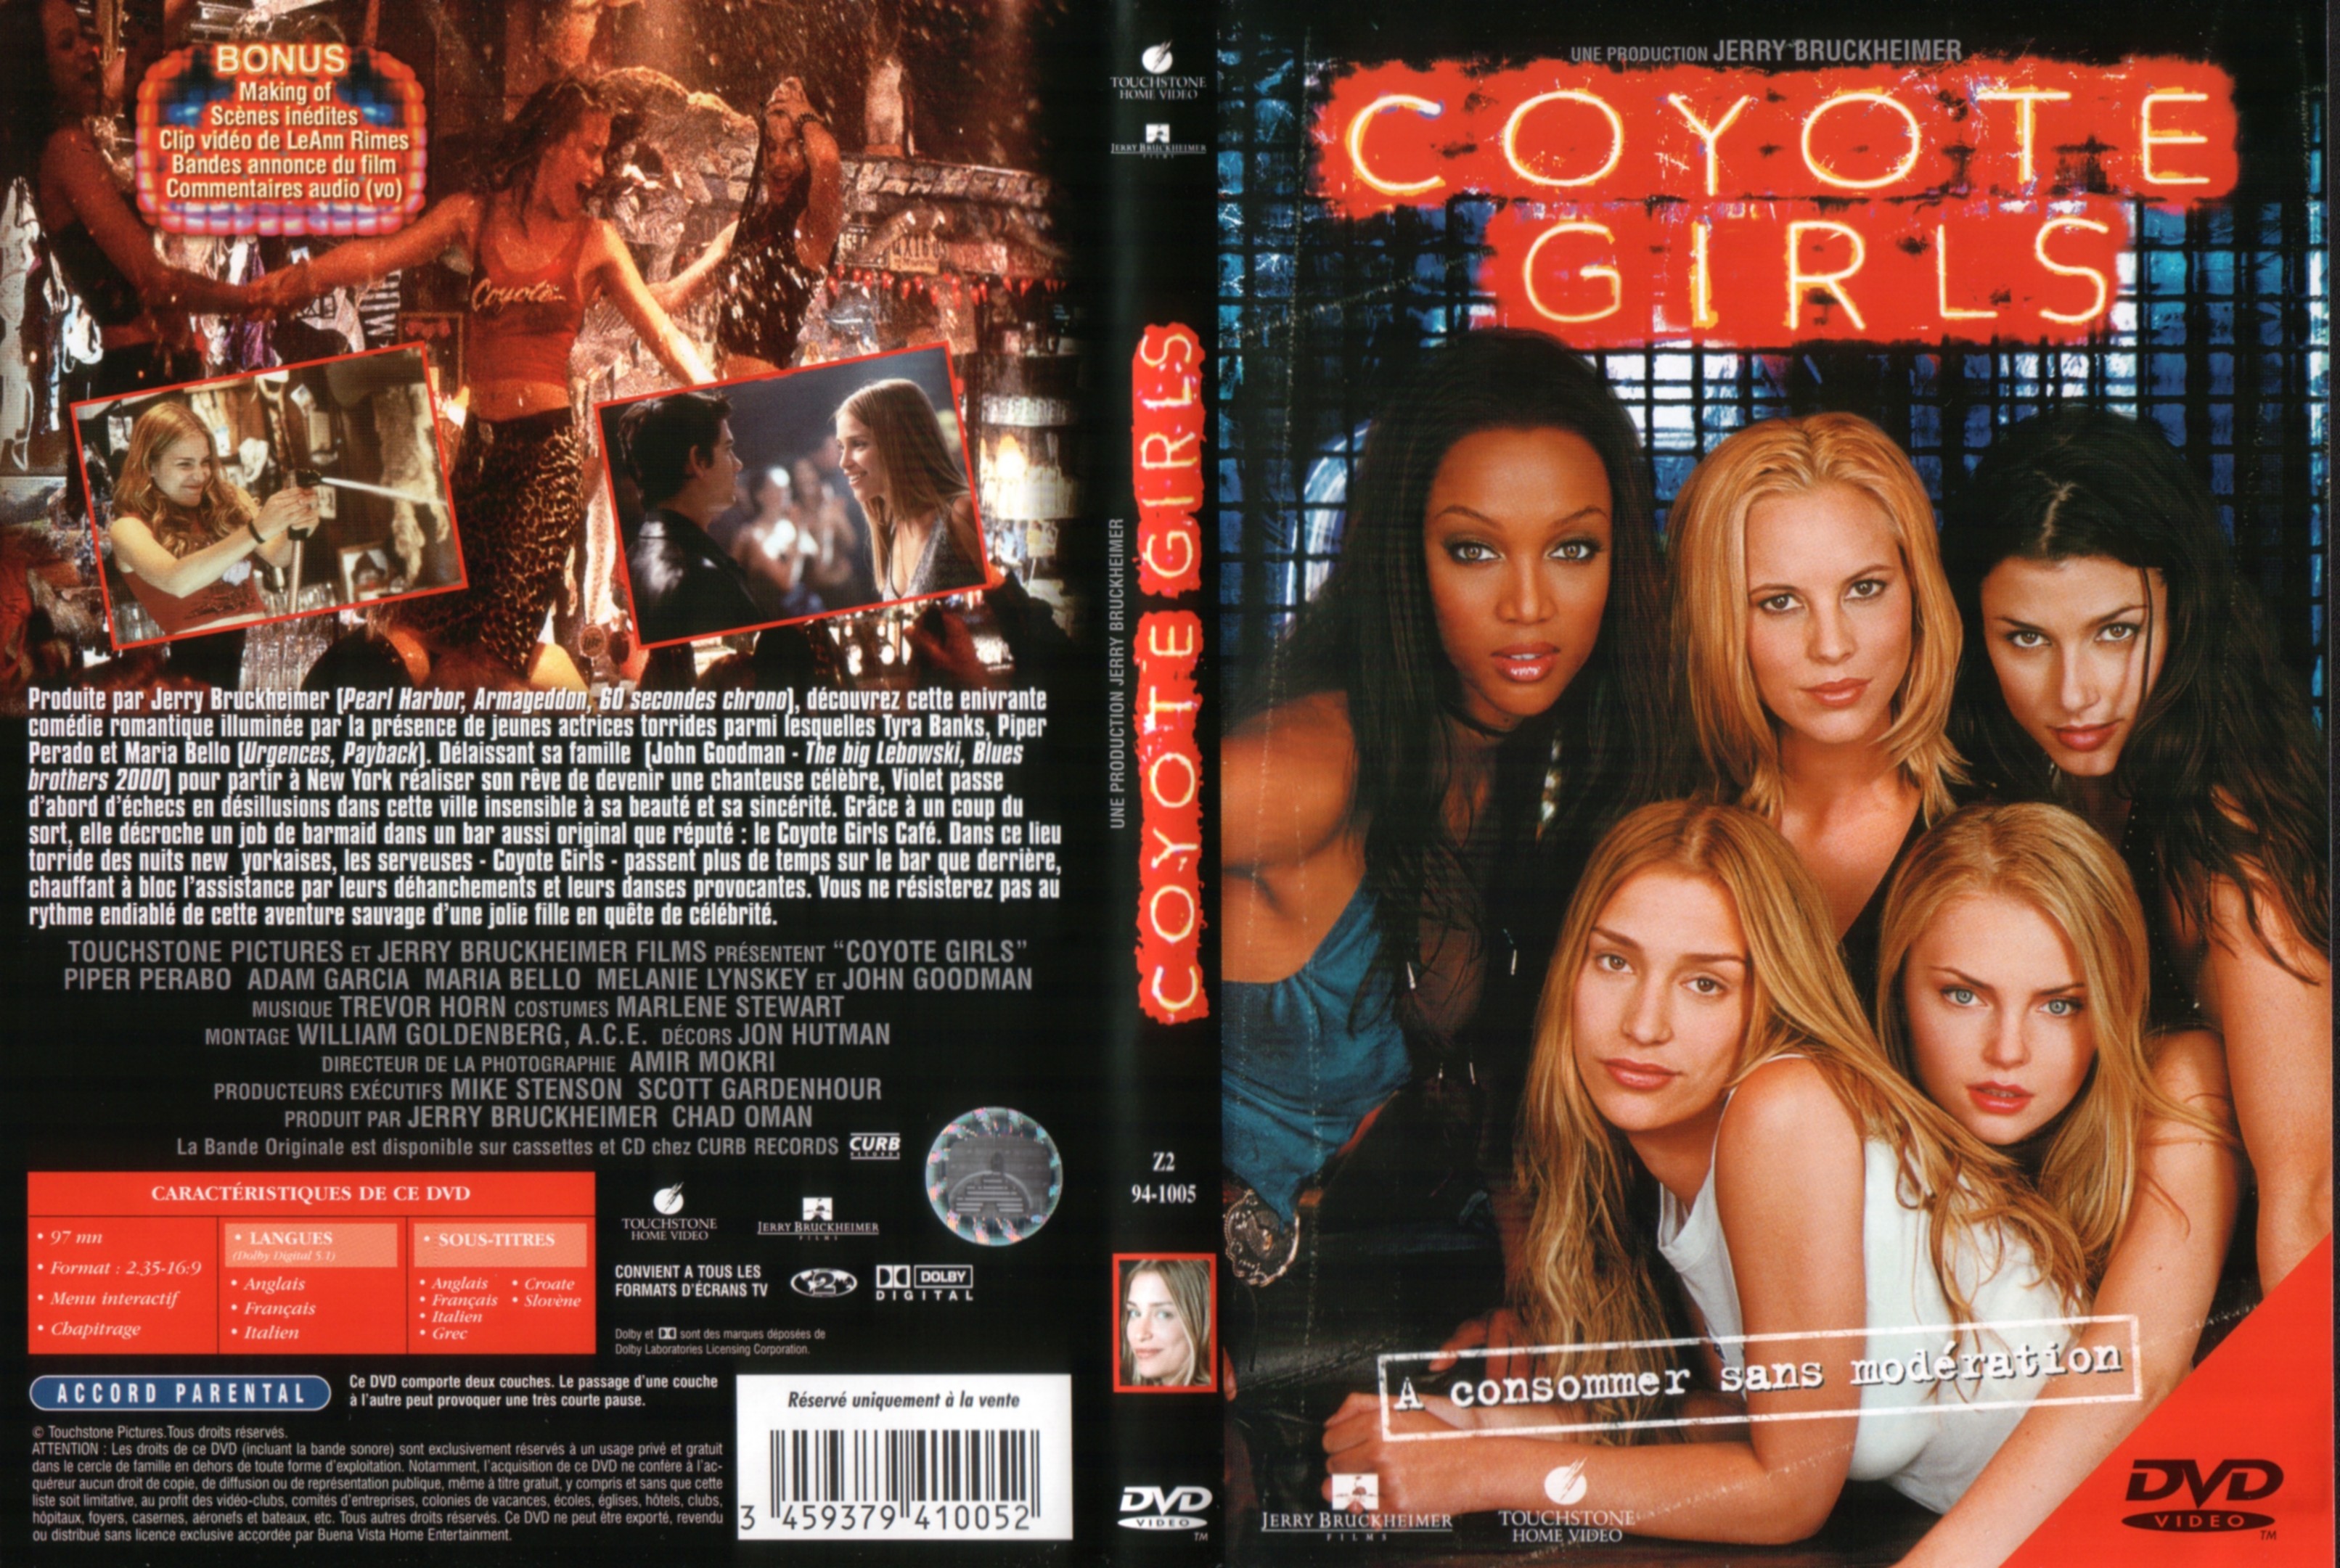 Jaquette DVD Coyote girls